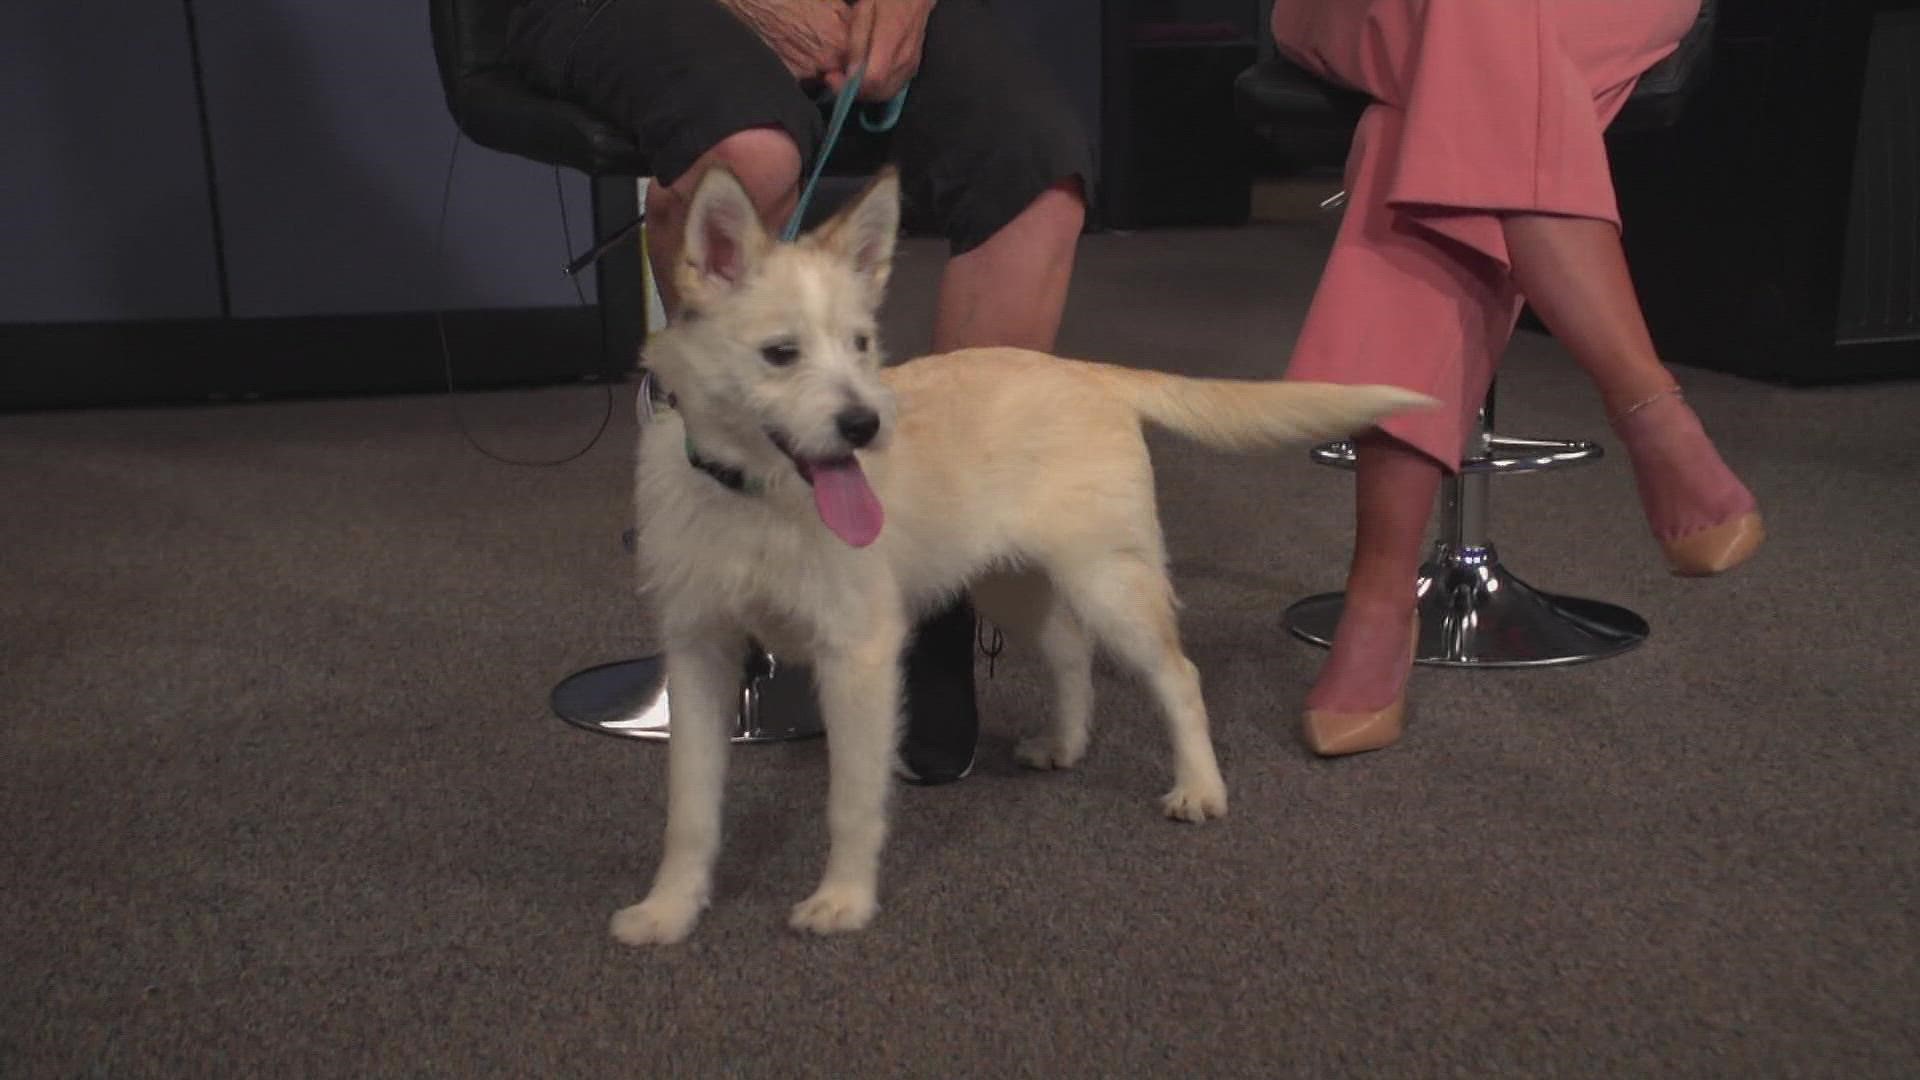 Hannah Banana, a sweet, soft puppy, is looking for her forever home. You can learn more about her at the Denver Animal Shelter.